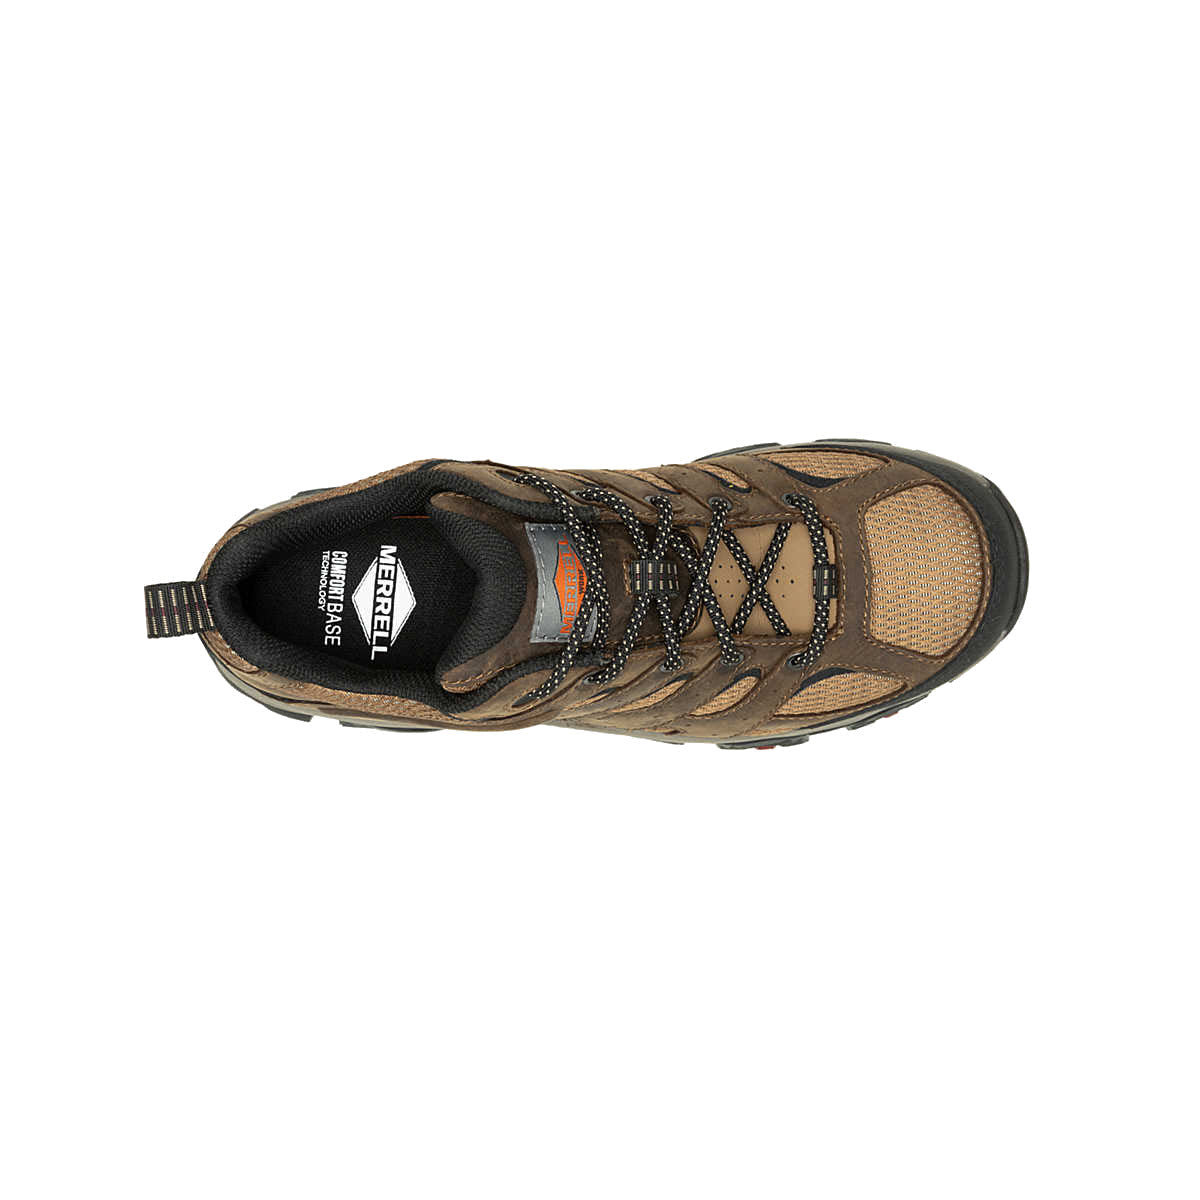 Top view of a brown and black Merrell Moab Vertex 2 Low Carbon Fiber Waterproof Leather hiking shoe with a heat-resistant outsole, visible laces, and brand logo.